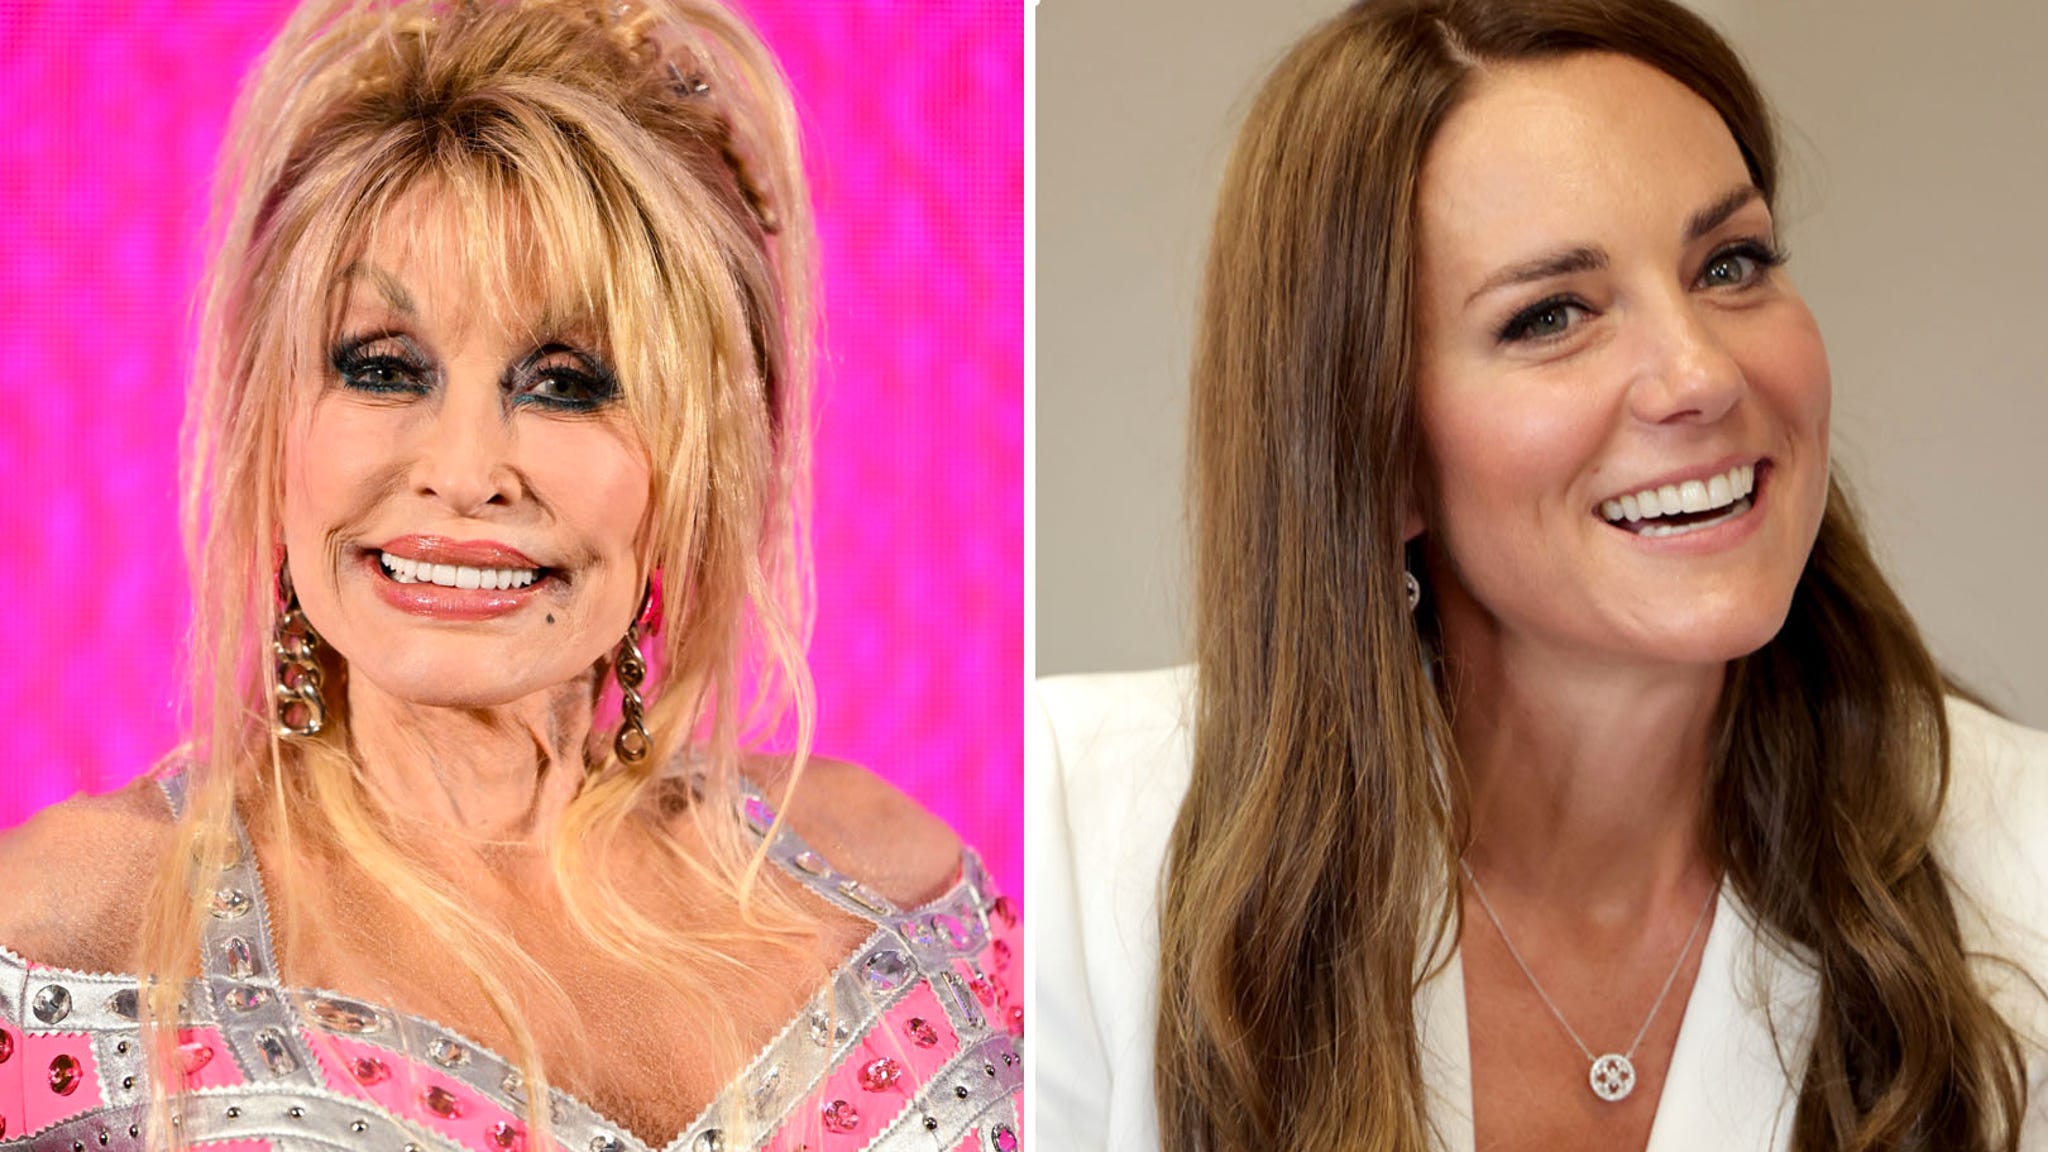 Why Dolly Parton Declined Kate Middleton Tea Party Invite